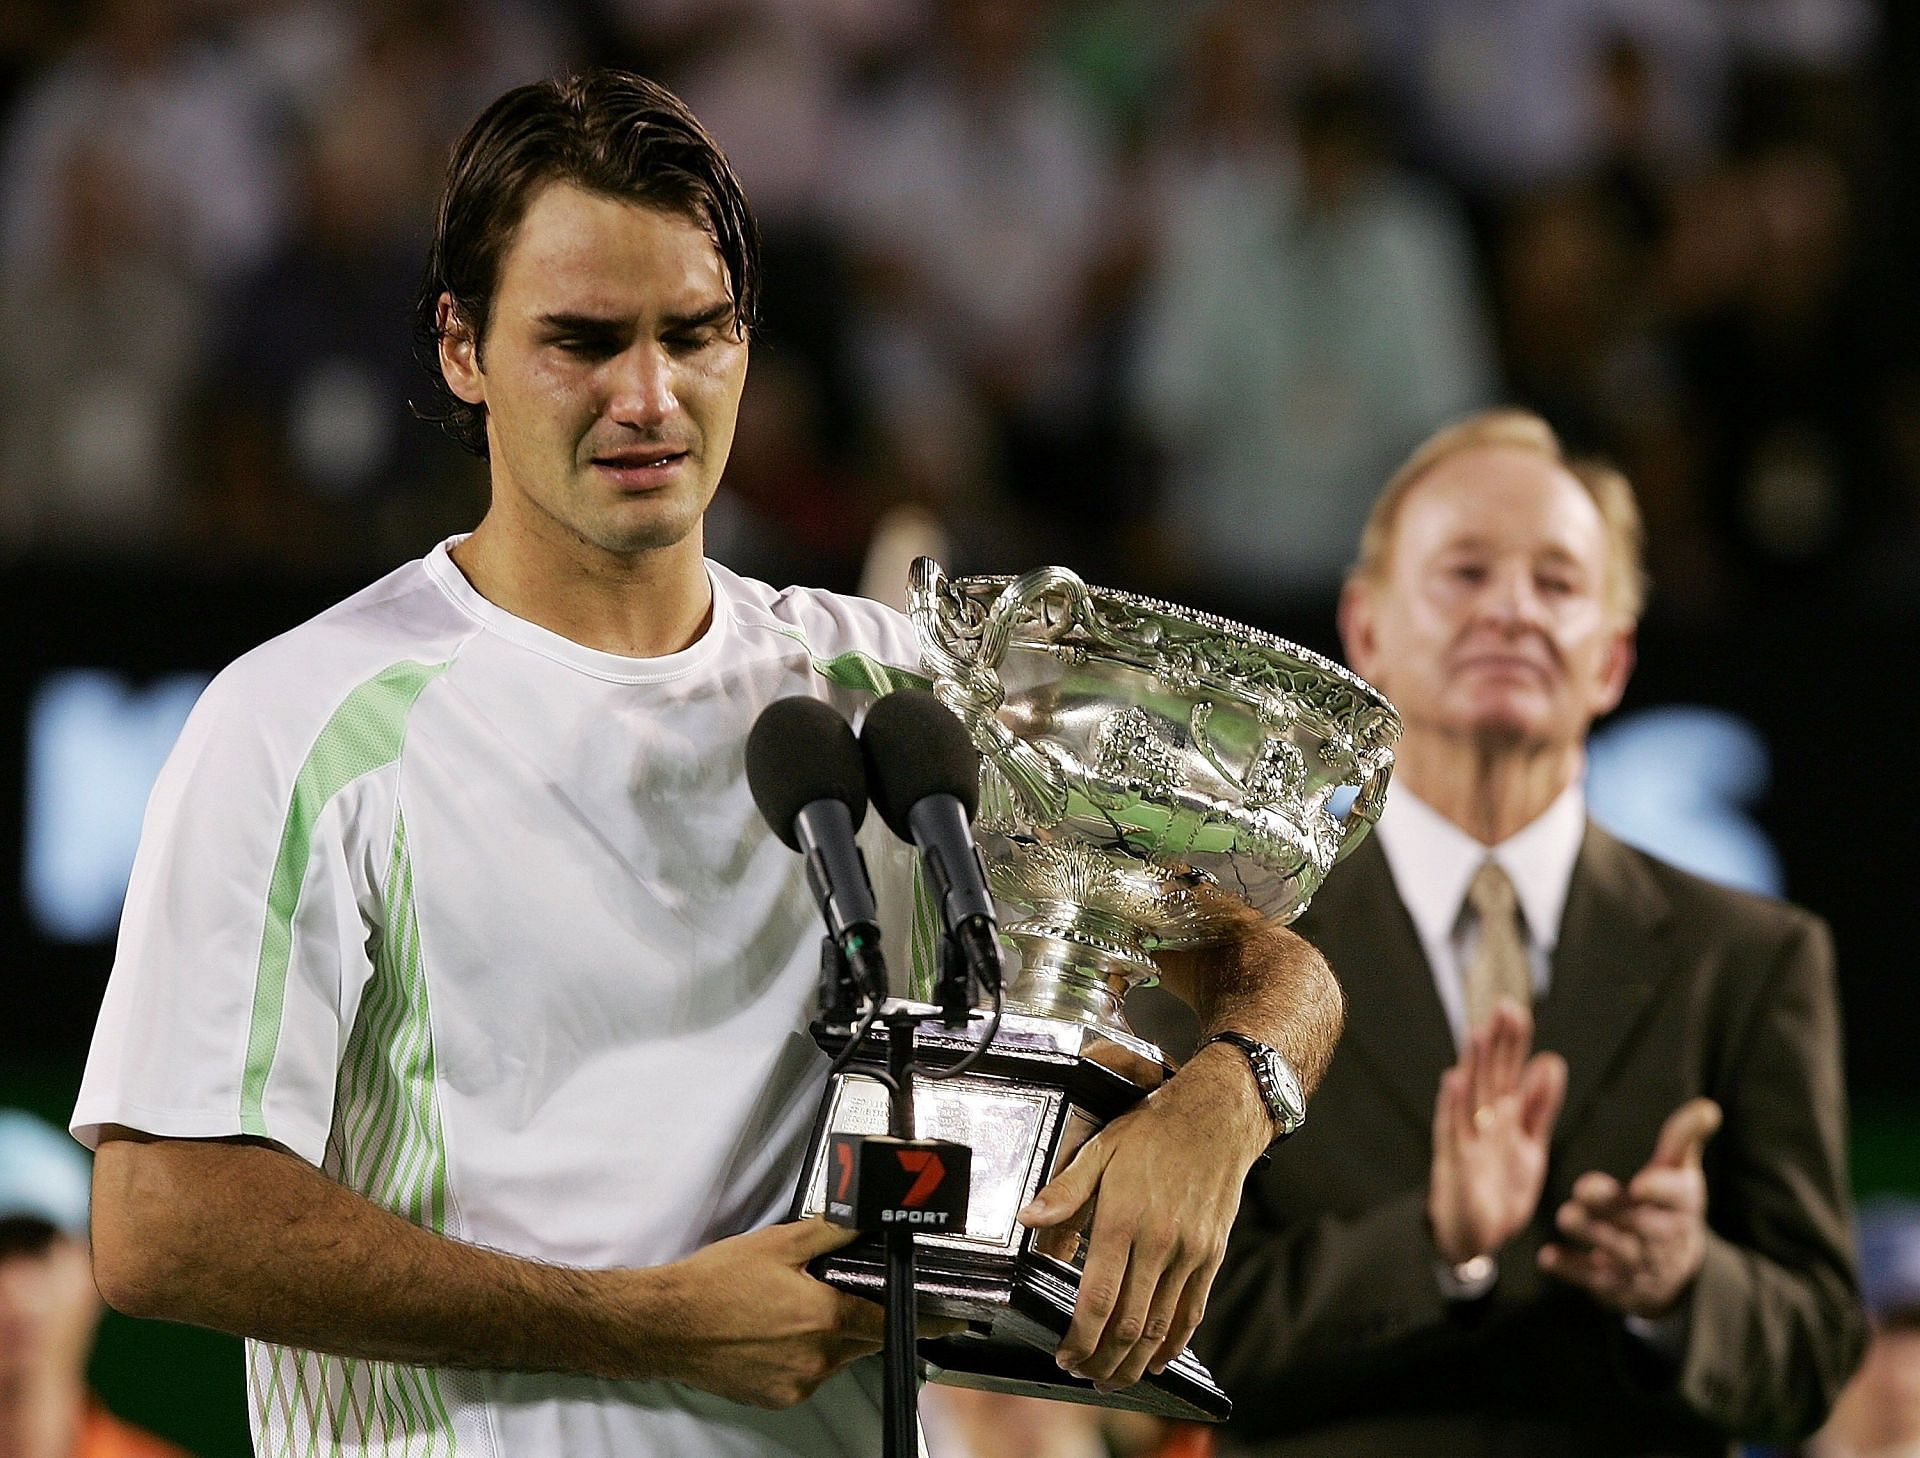 Roger Federer won two consecutive Grand Slams on hardcourts before eventually losing to Rafael Nadal/